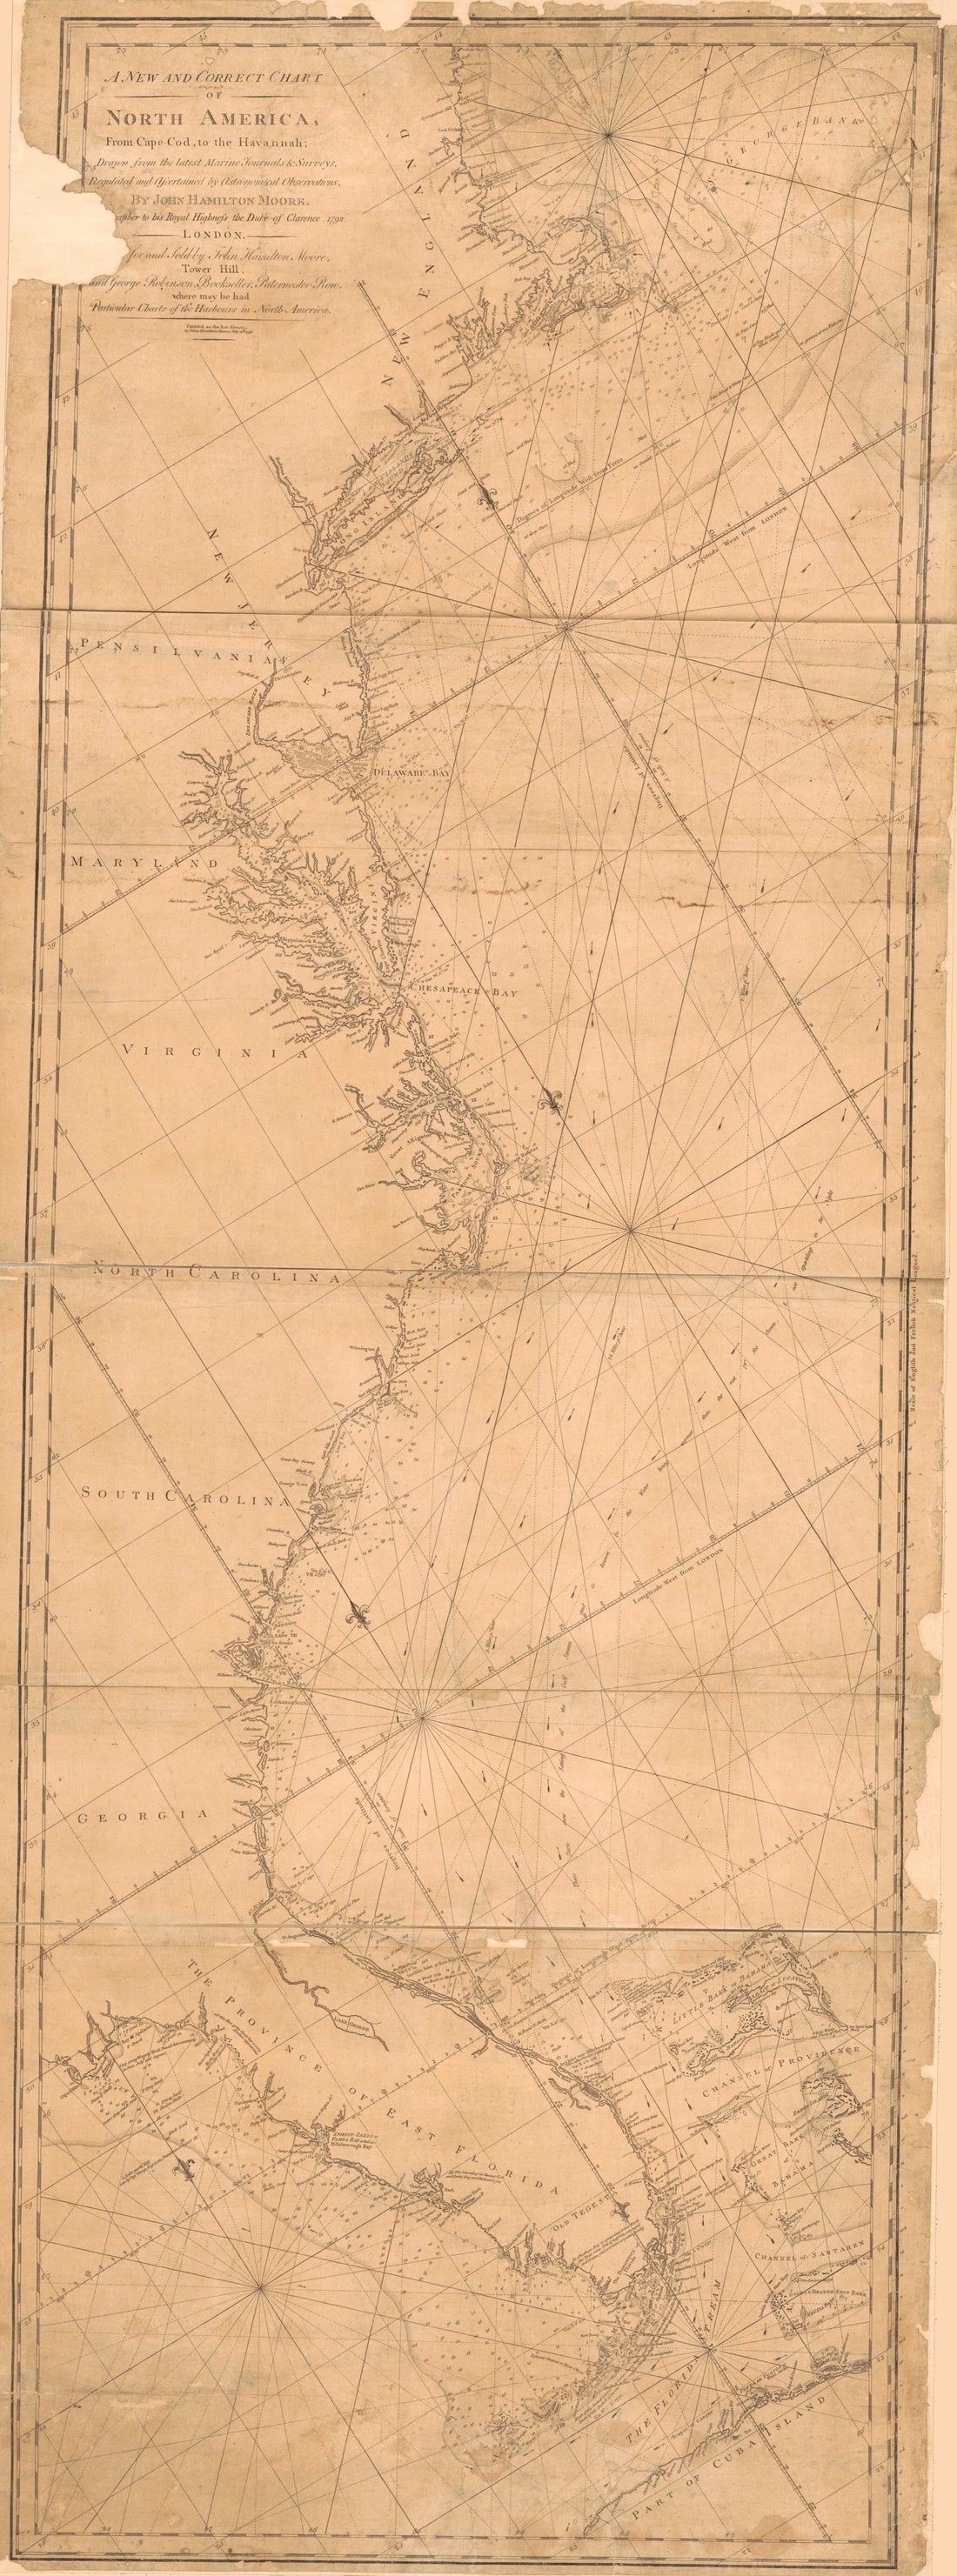 This old map of A New and Correct Chart of North America from Cape Cod to the Havannah from 1796 was created by John Hamilton Moore in 1796